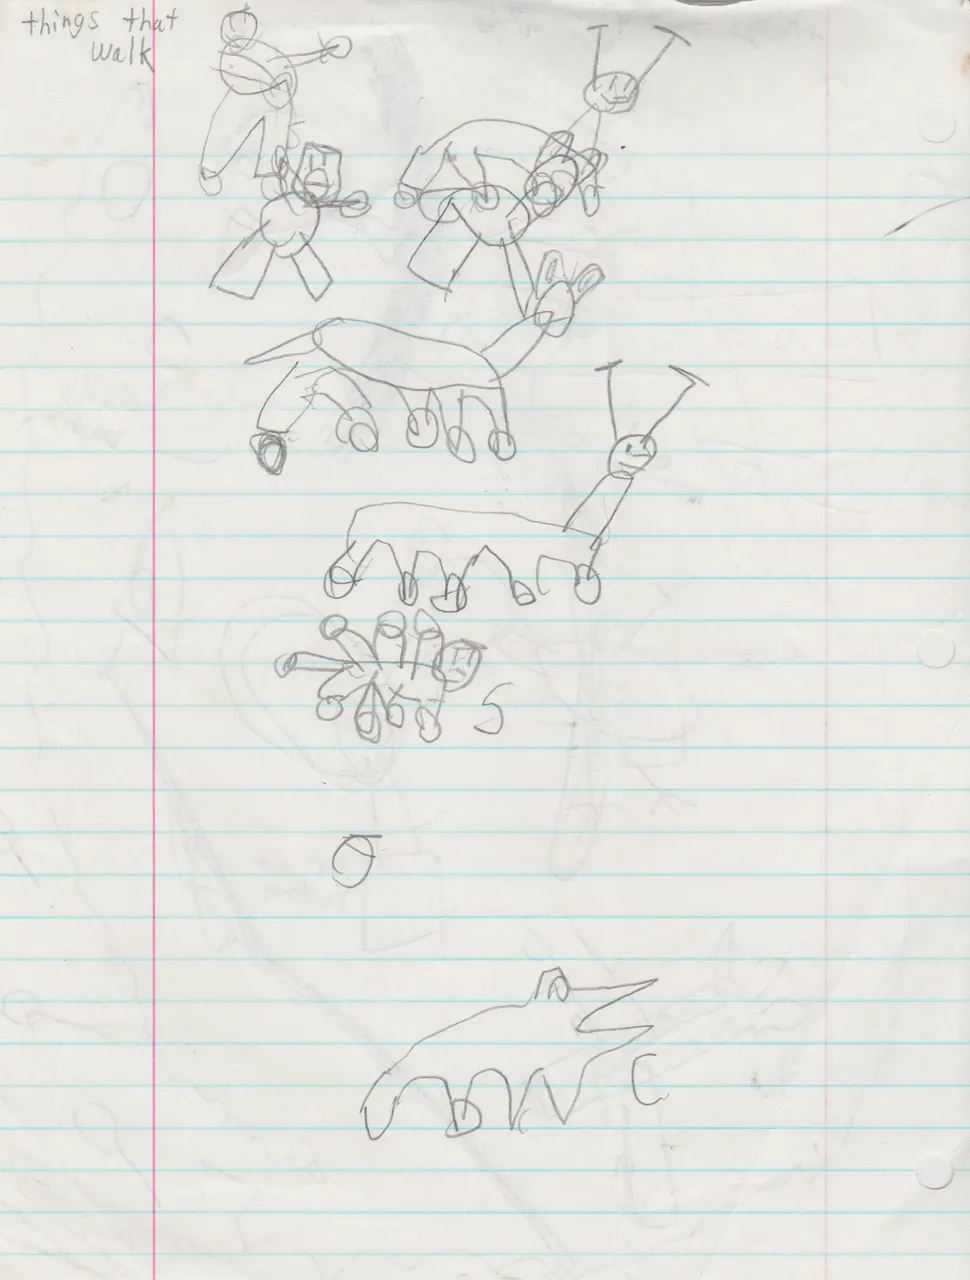 1993-04-07 - Wednesday - Things that fly or swim or other things series of drawings-2.png